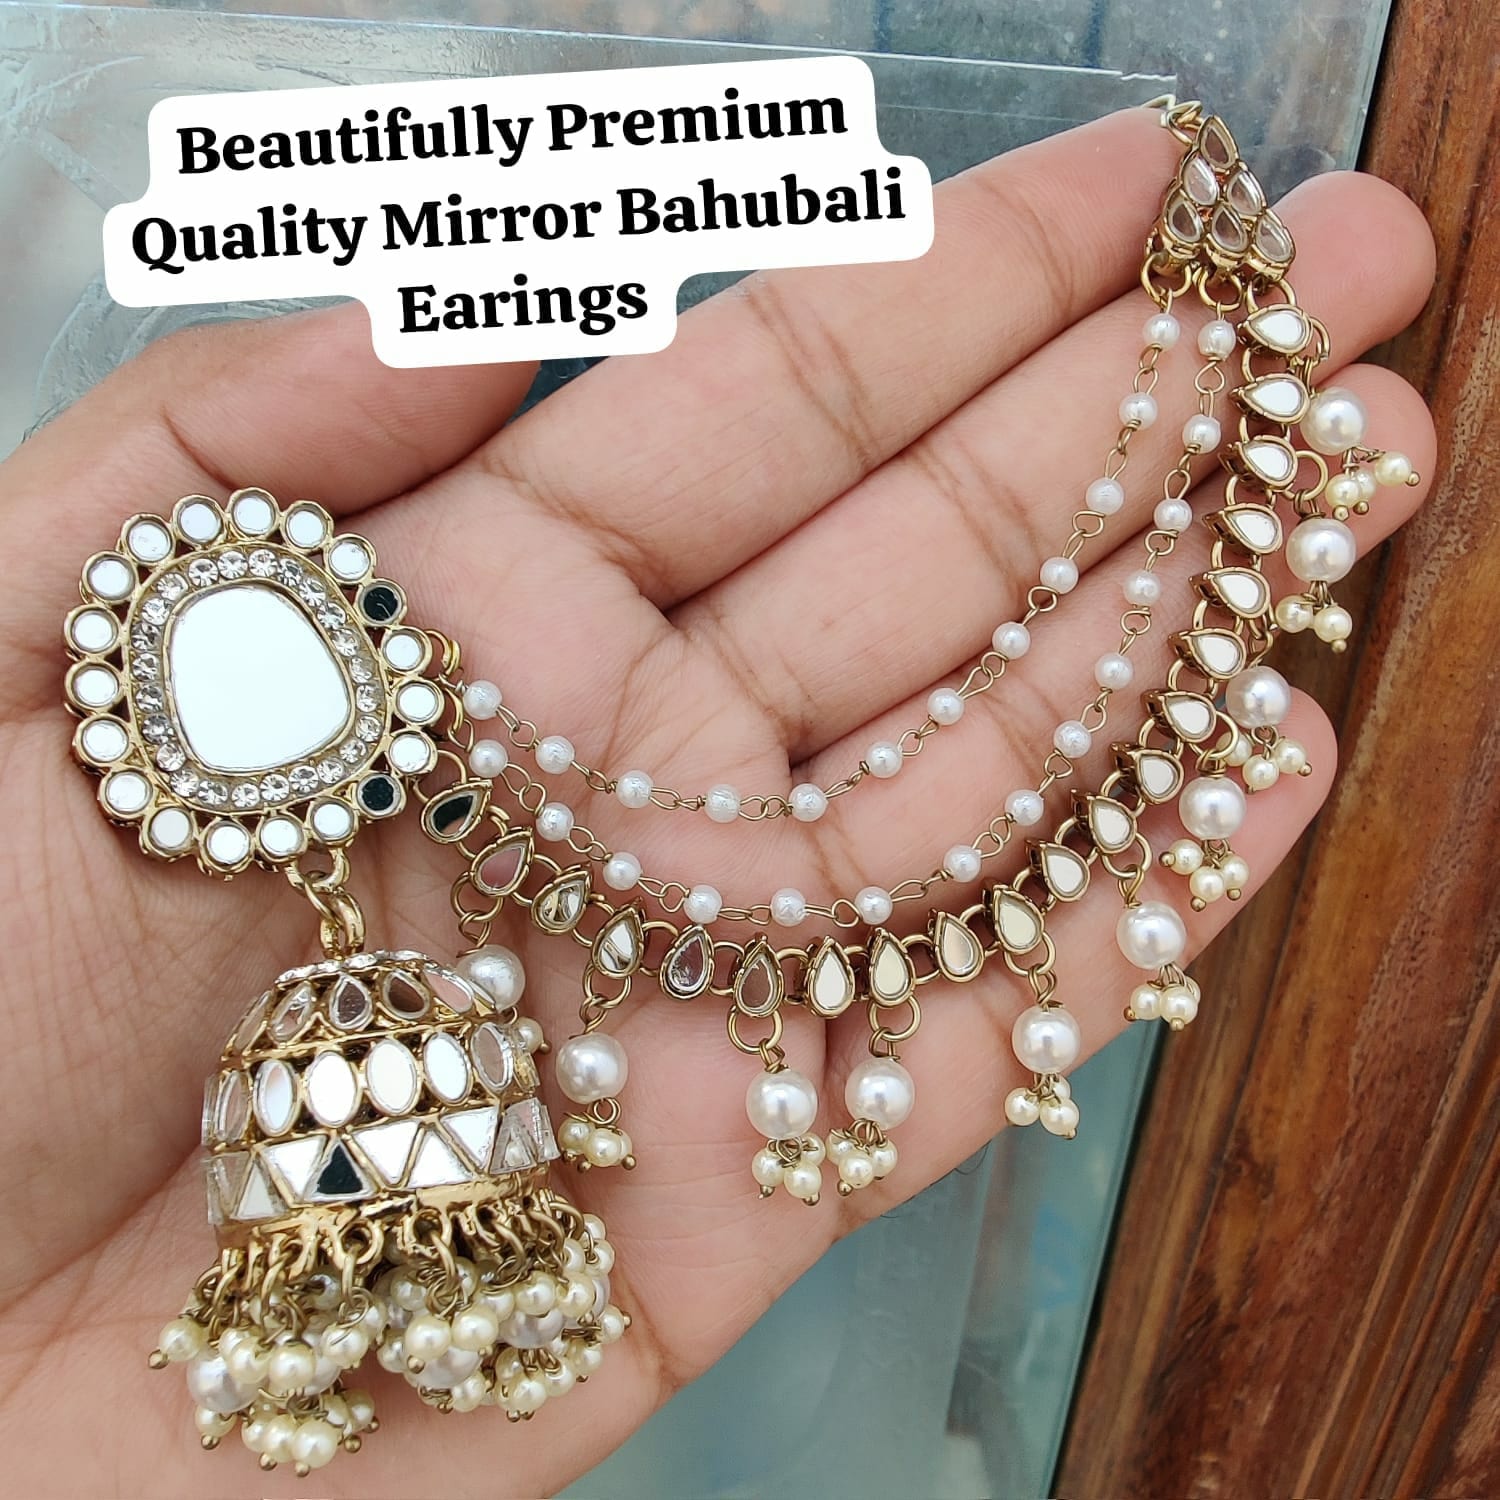 Jewellers Golden Bahubali Tops Stud Earrings For Women/Girls/Gold  Plated/Latest Design/Attractive Lo at Rs 15/piece | गोल्ड प्लेटेड इयररिंग  in Mumbai | ID: 21303119197